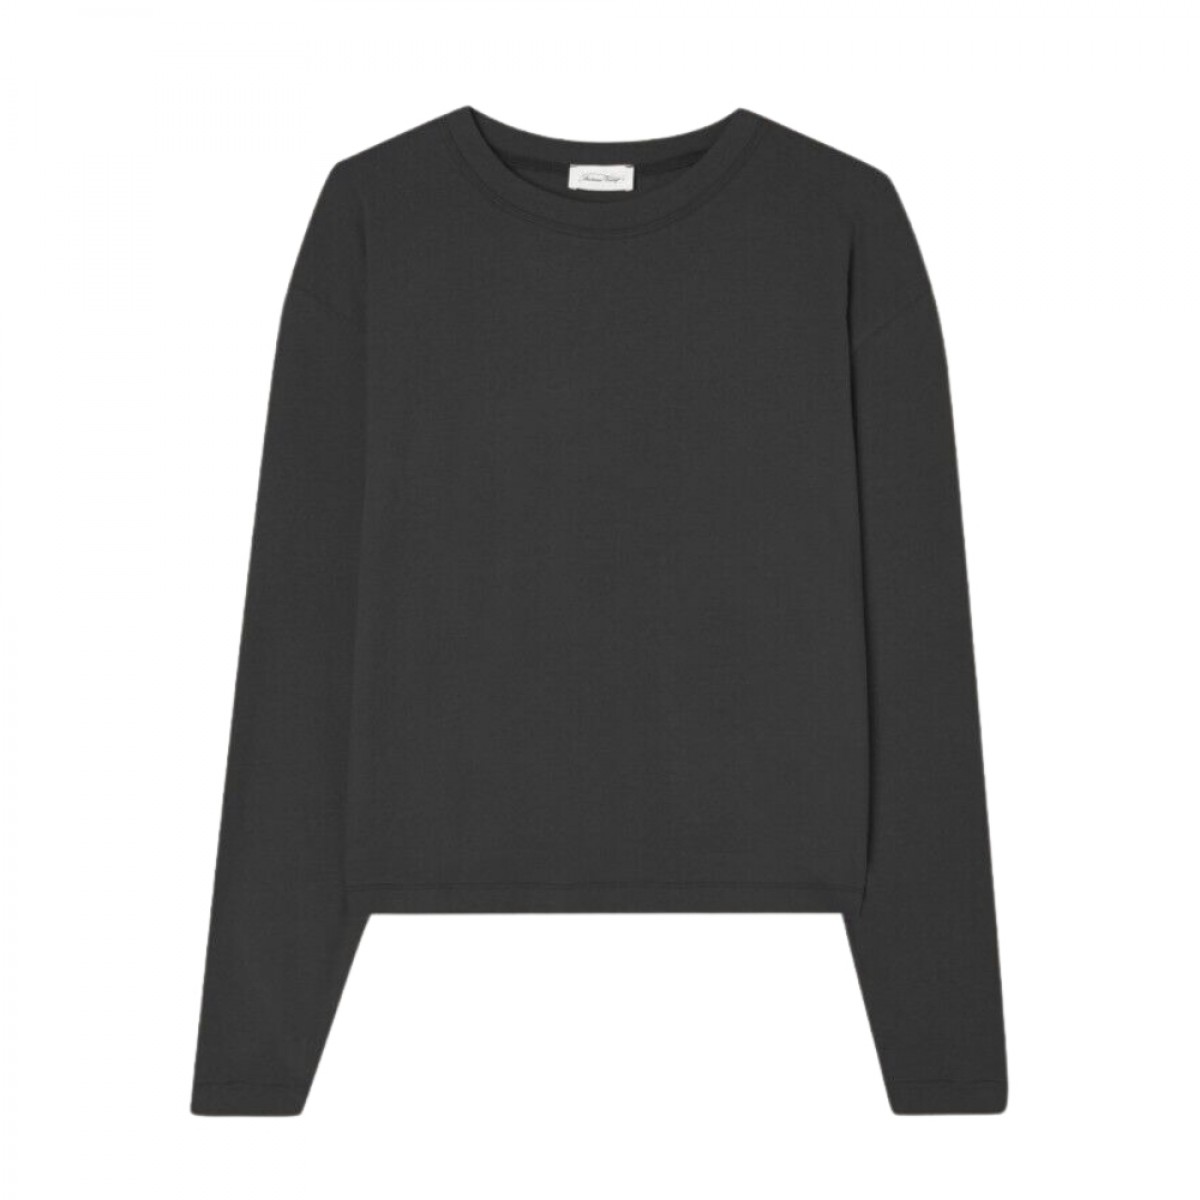 ypawood tee long sleeve - carbon vintage - front